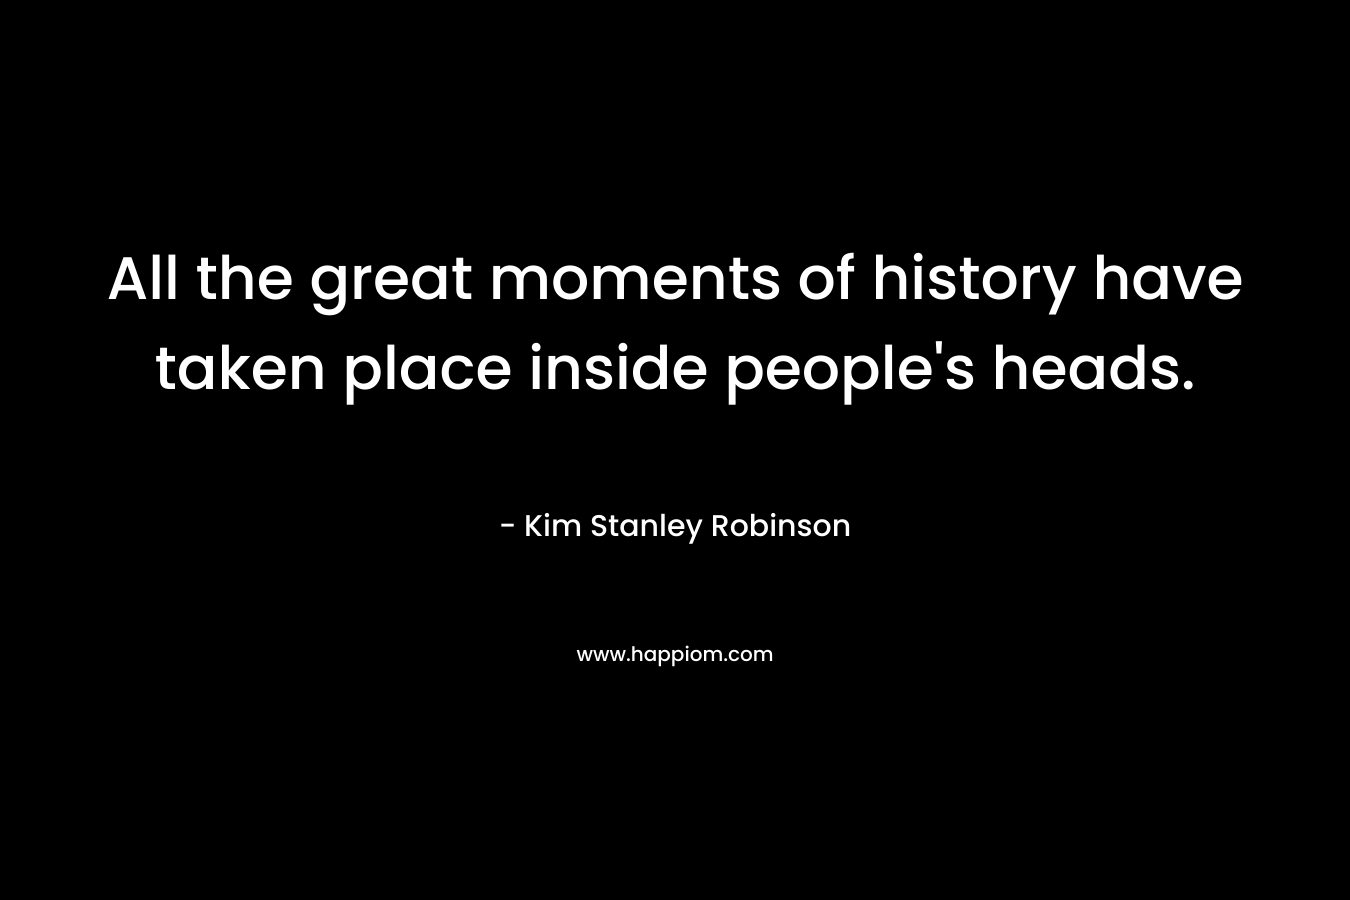 All the great moments of history have taken place inside people's heads.